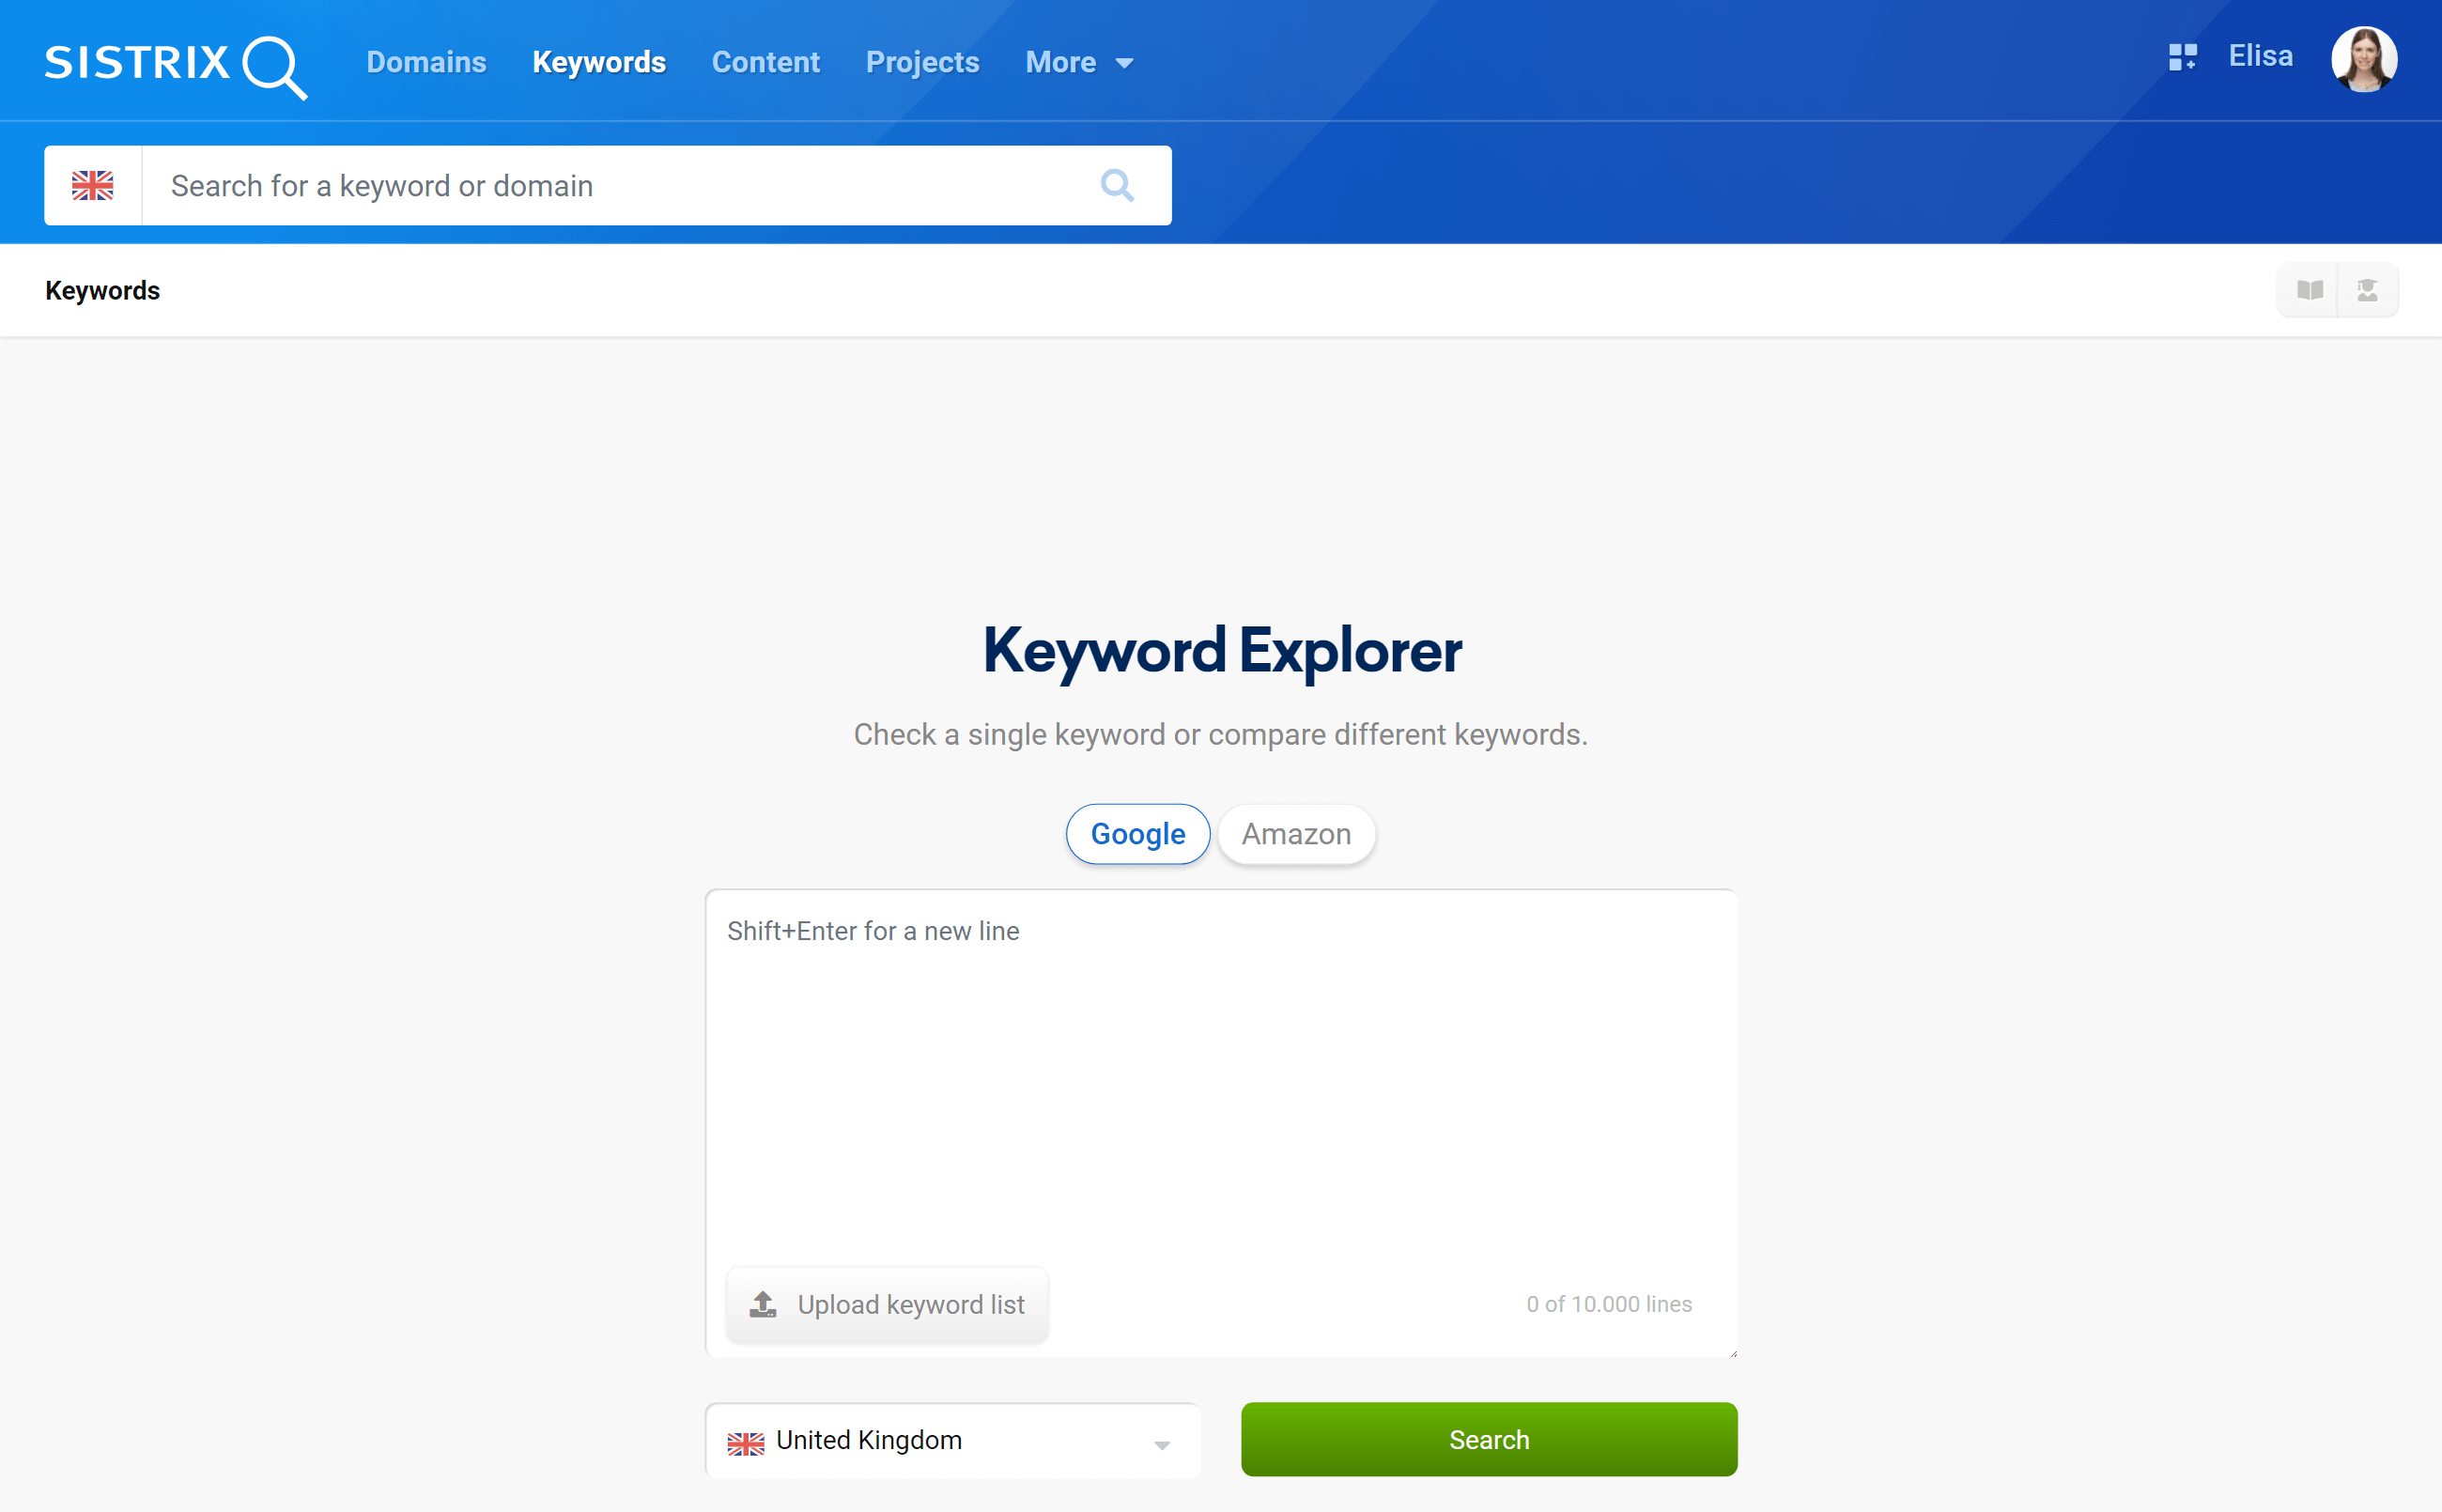 Keyword Explorer: check a single keyword or compare different ones